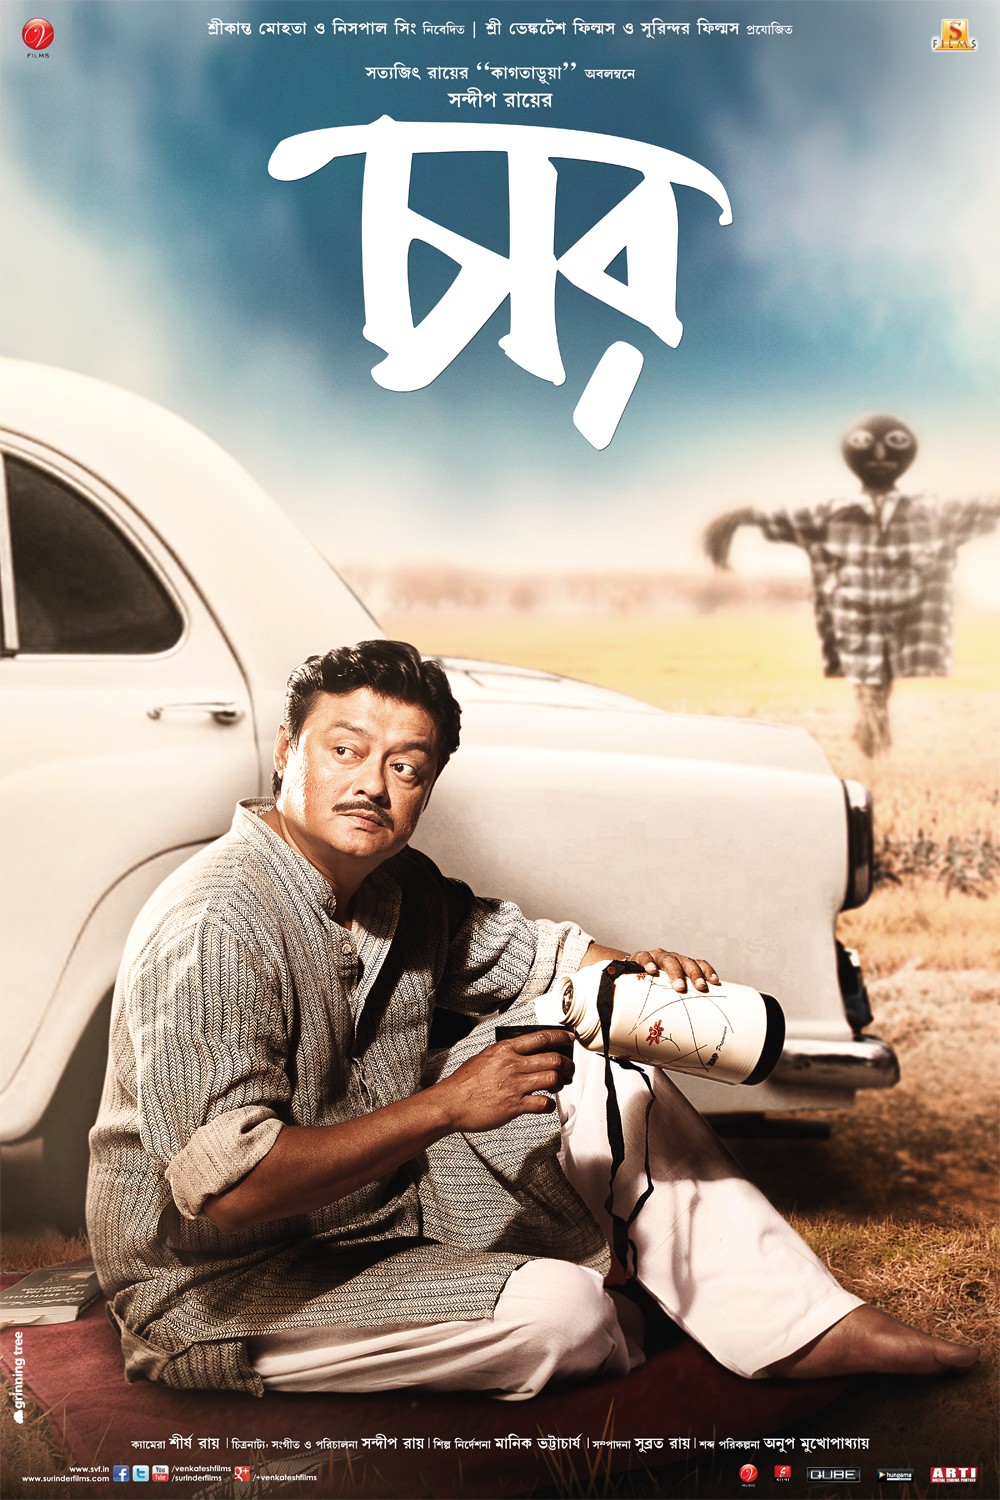 Extra Large Movie Poster Image for Chaar (#6 of 11)